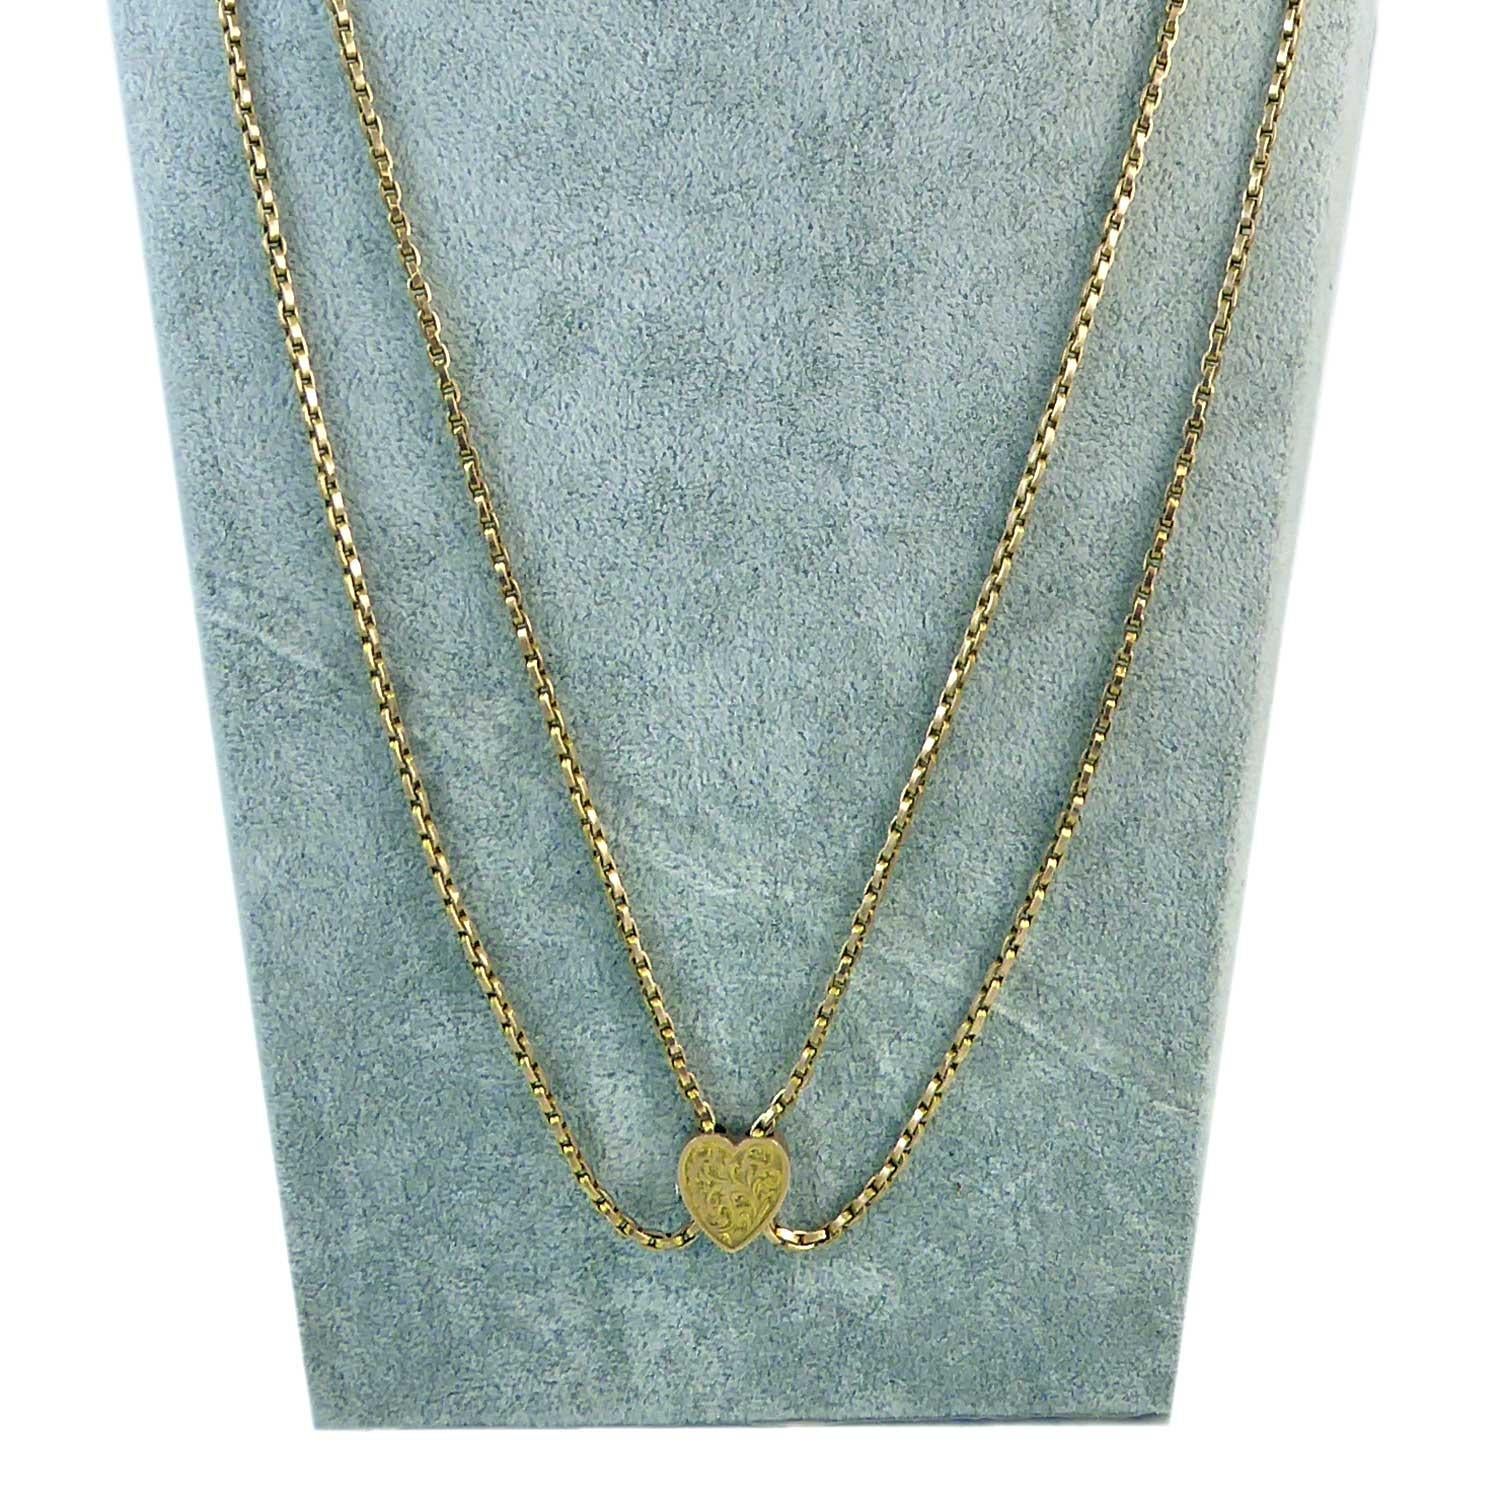 Women's Victorian Antique Gold Long Chain, Heart Shaped Engraved Slider, Yellow Gold